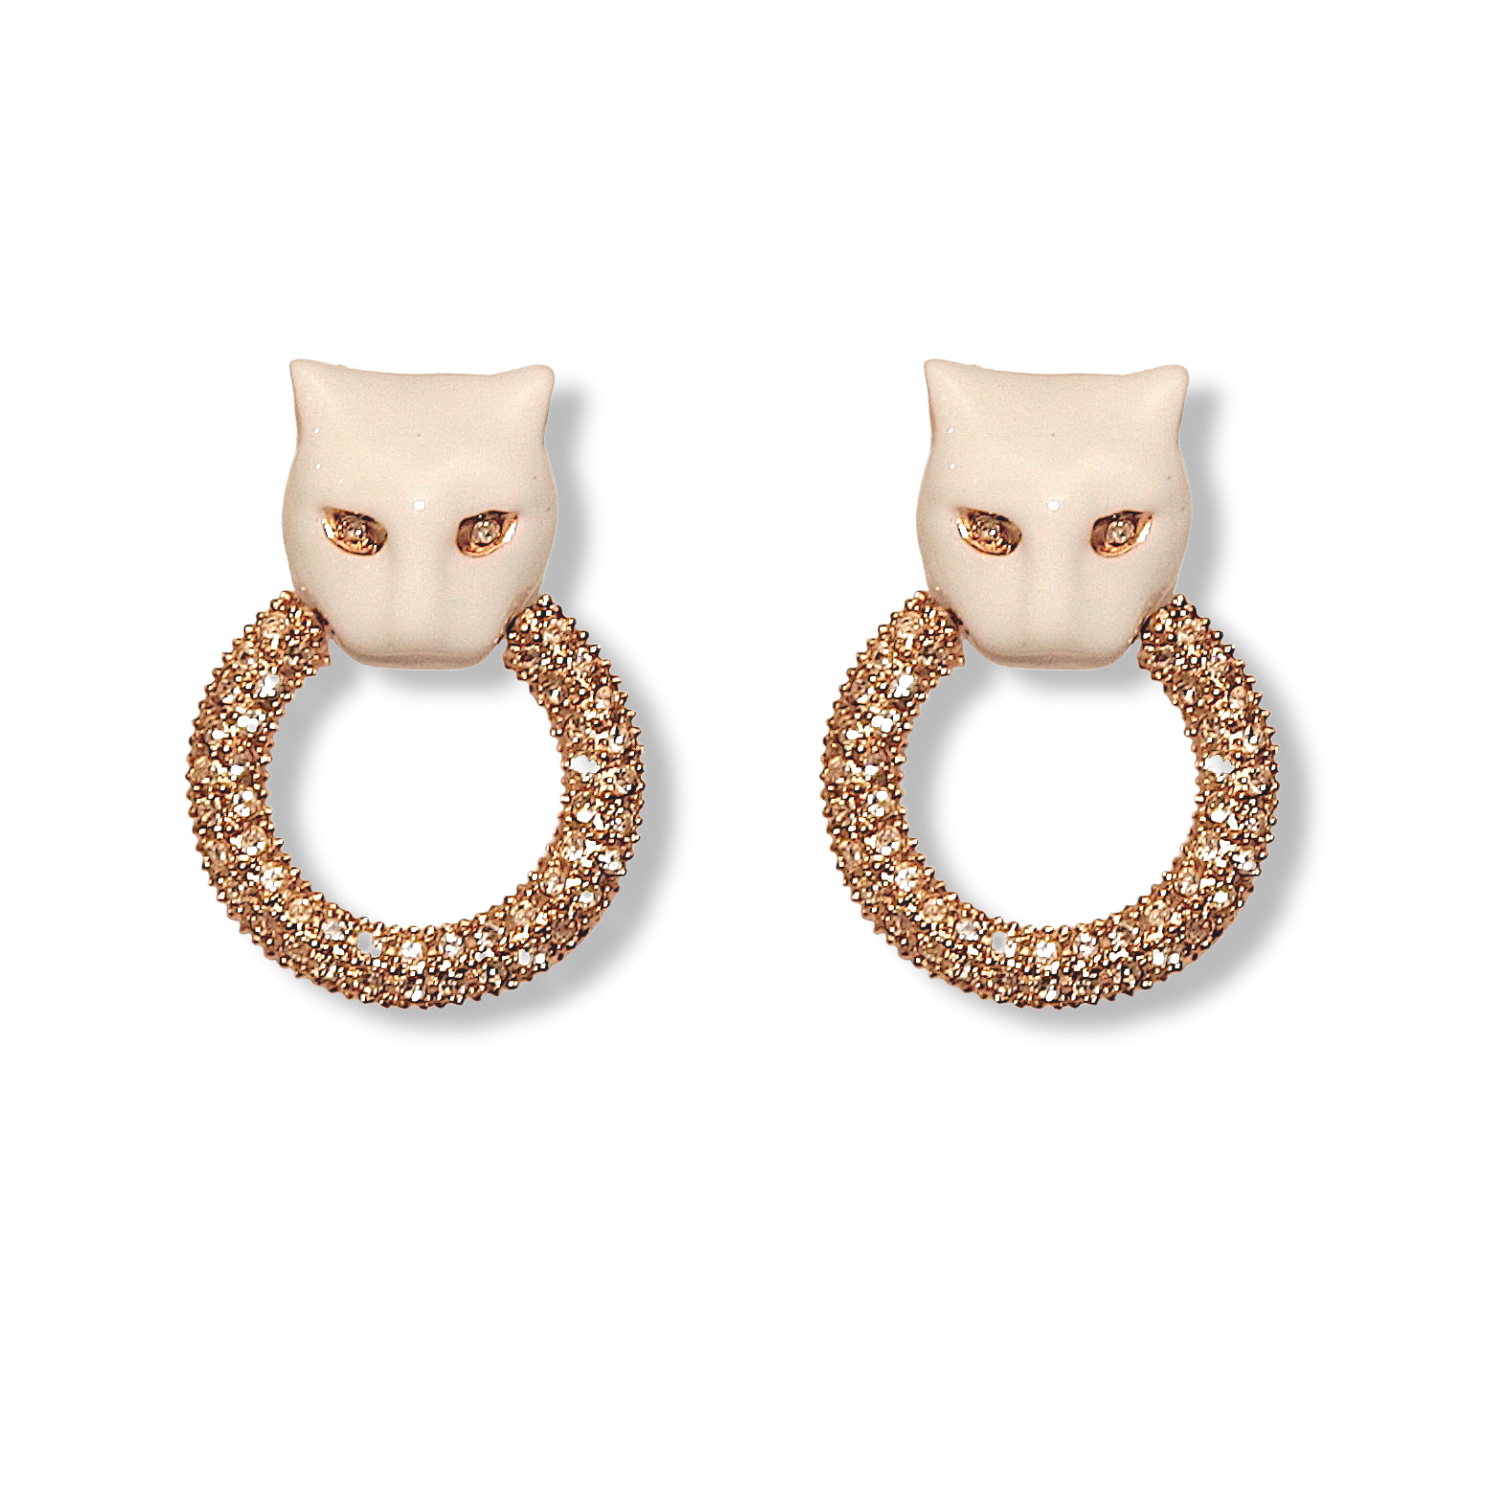 WHITE PANTHER EARRINGS 1